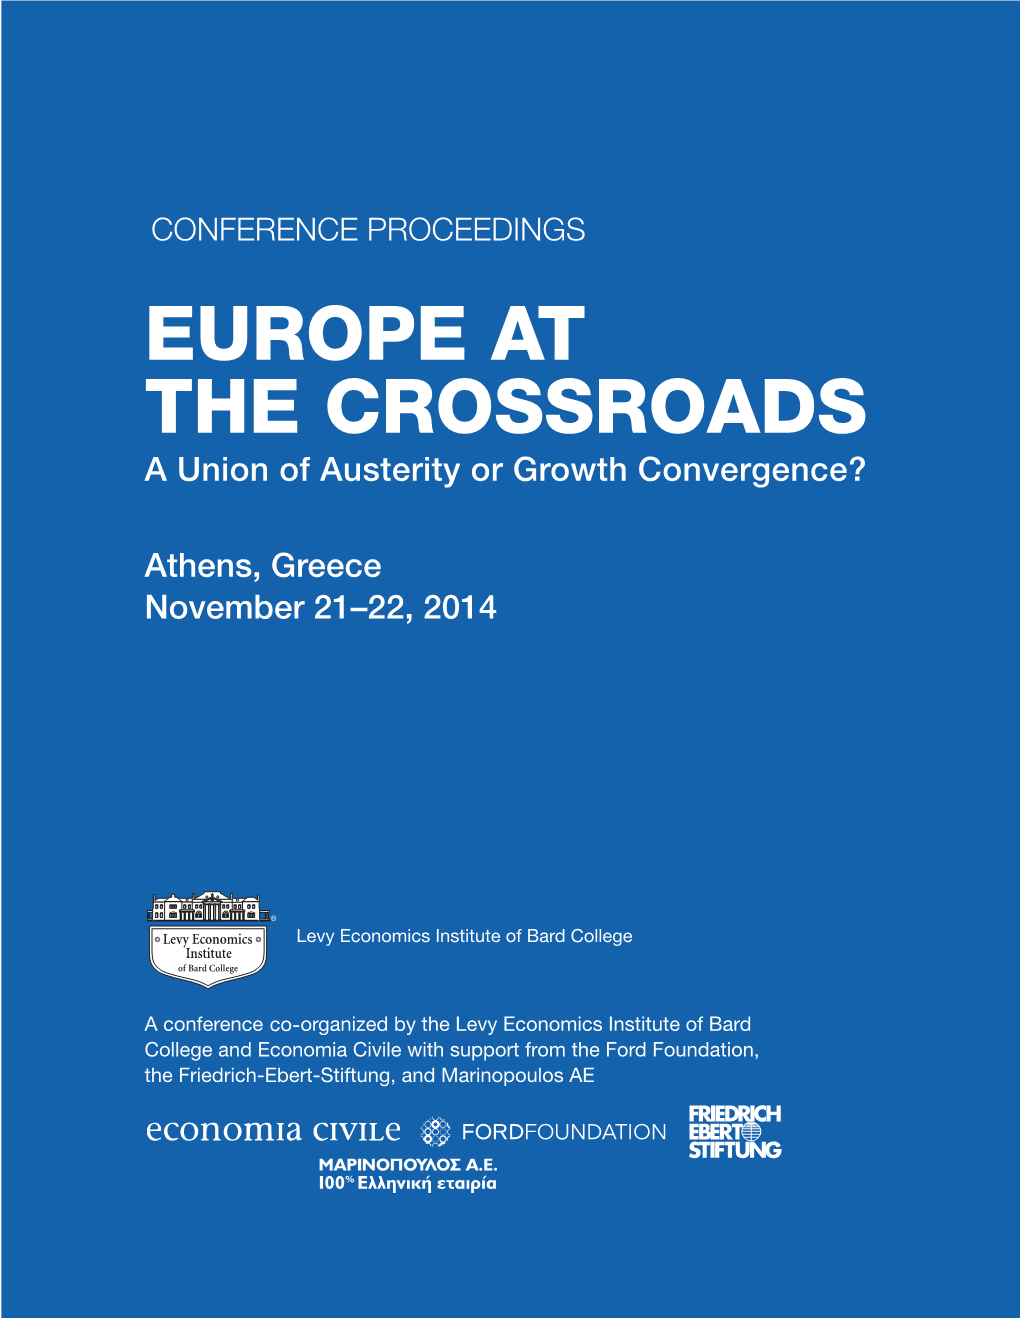 Athens 2014 Conference Proceedings